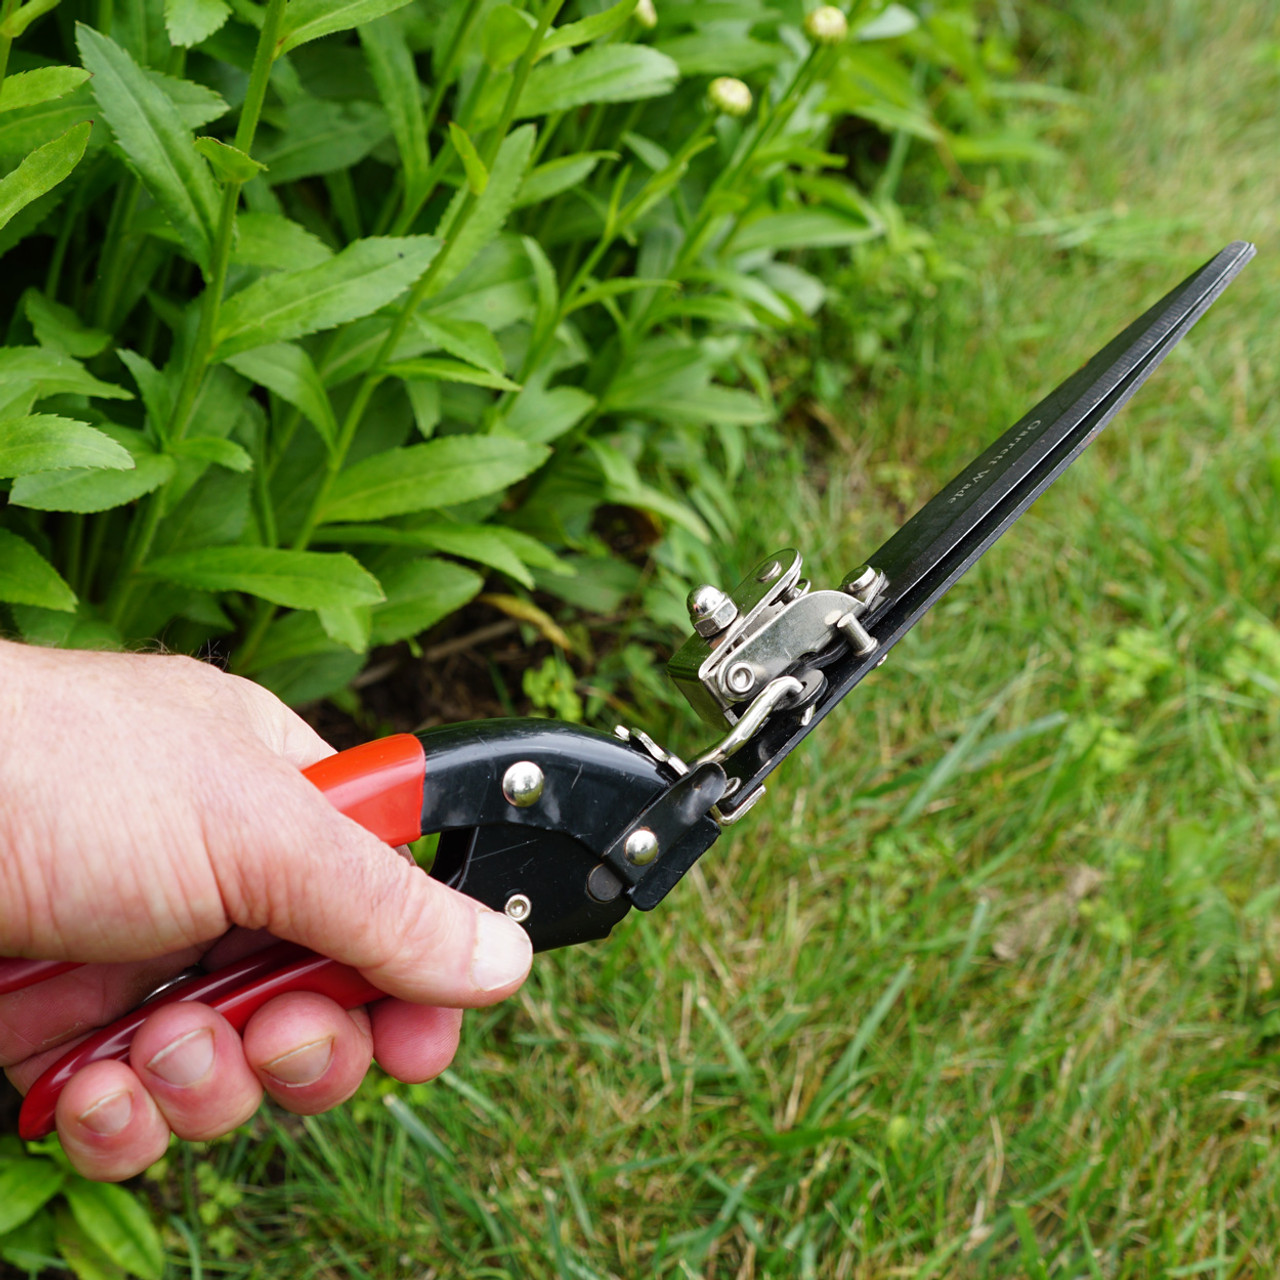  Trimming scissors for cannabis,pruning Shears for